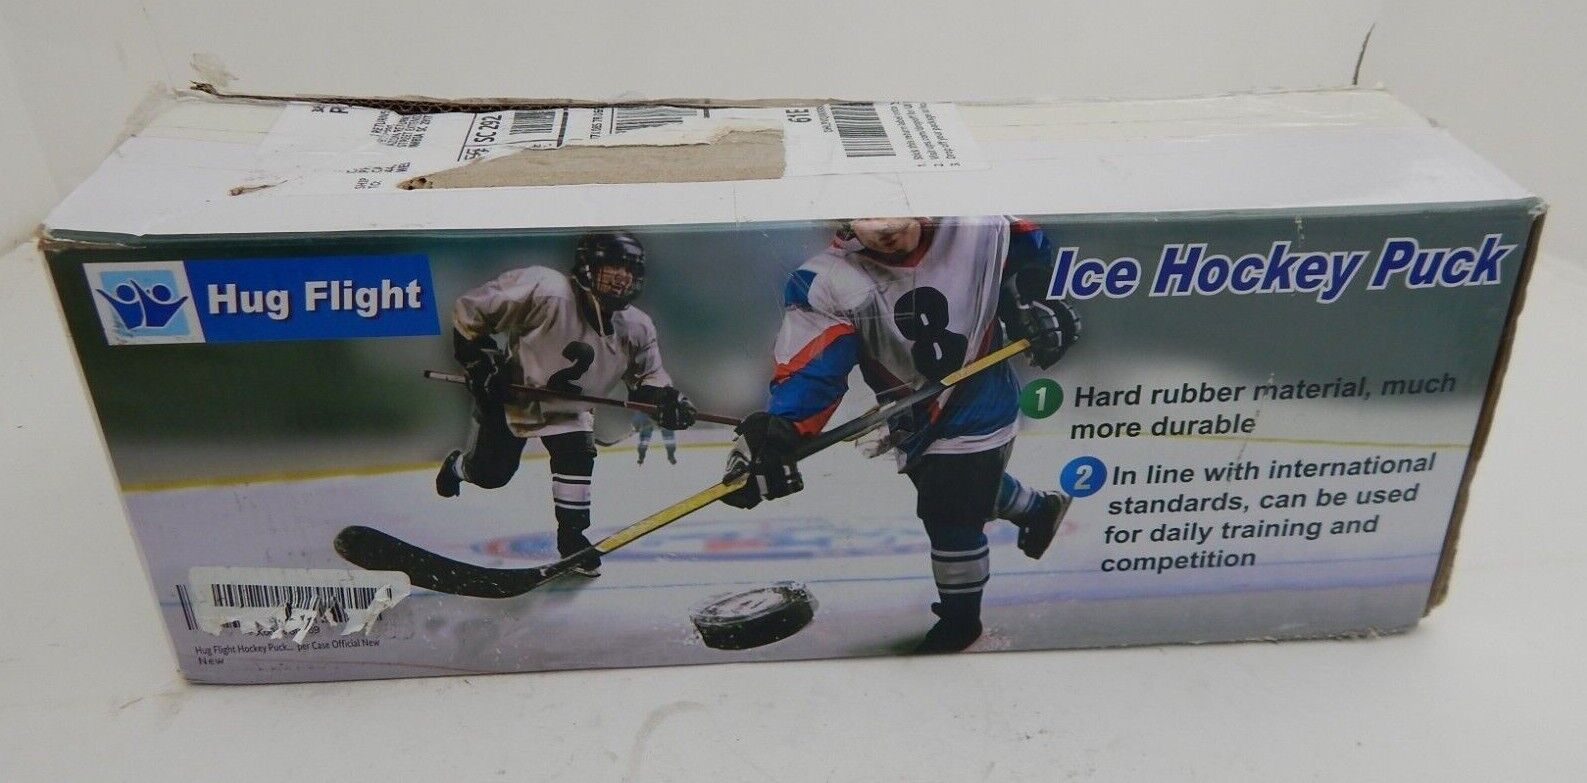 Hug Flight Ice Hockey Pucks New In Box Case of 48 For Training & Competition